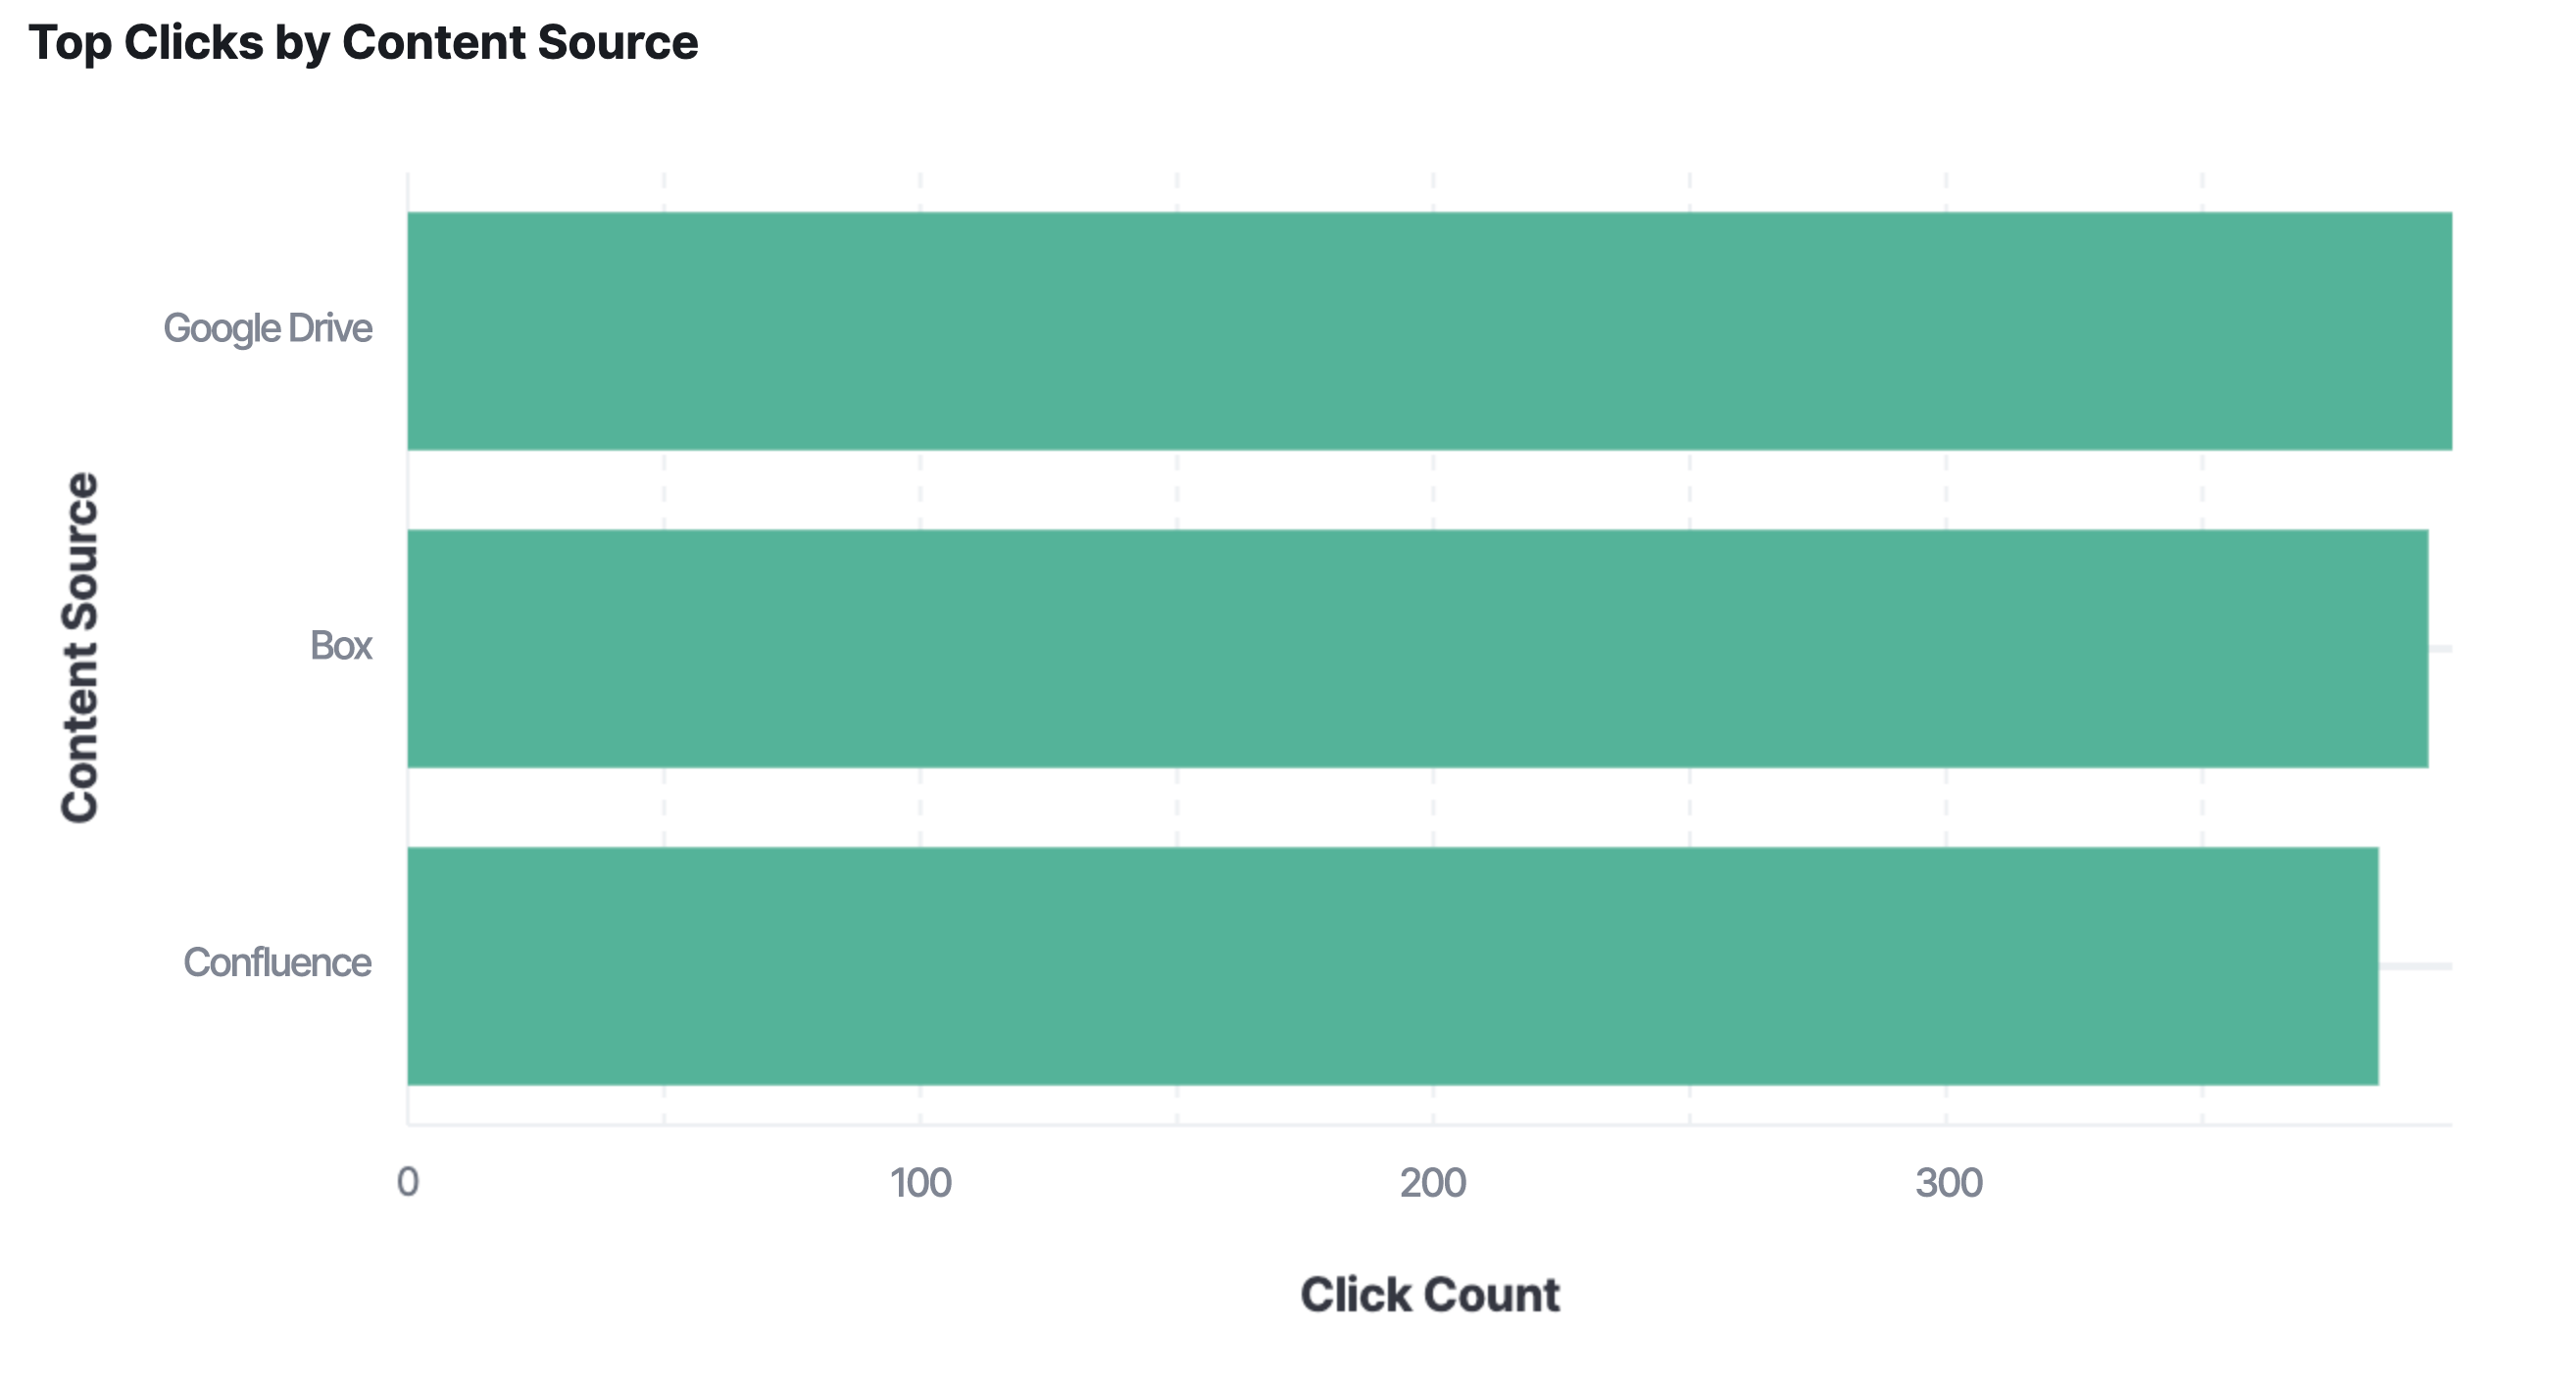 Elastic Workplace Search analytics: Top clicks per content source